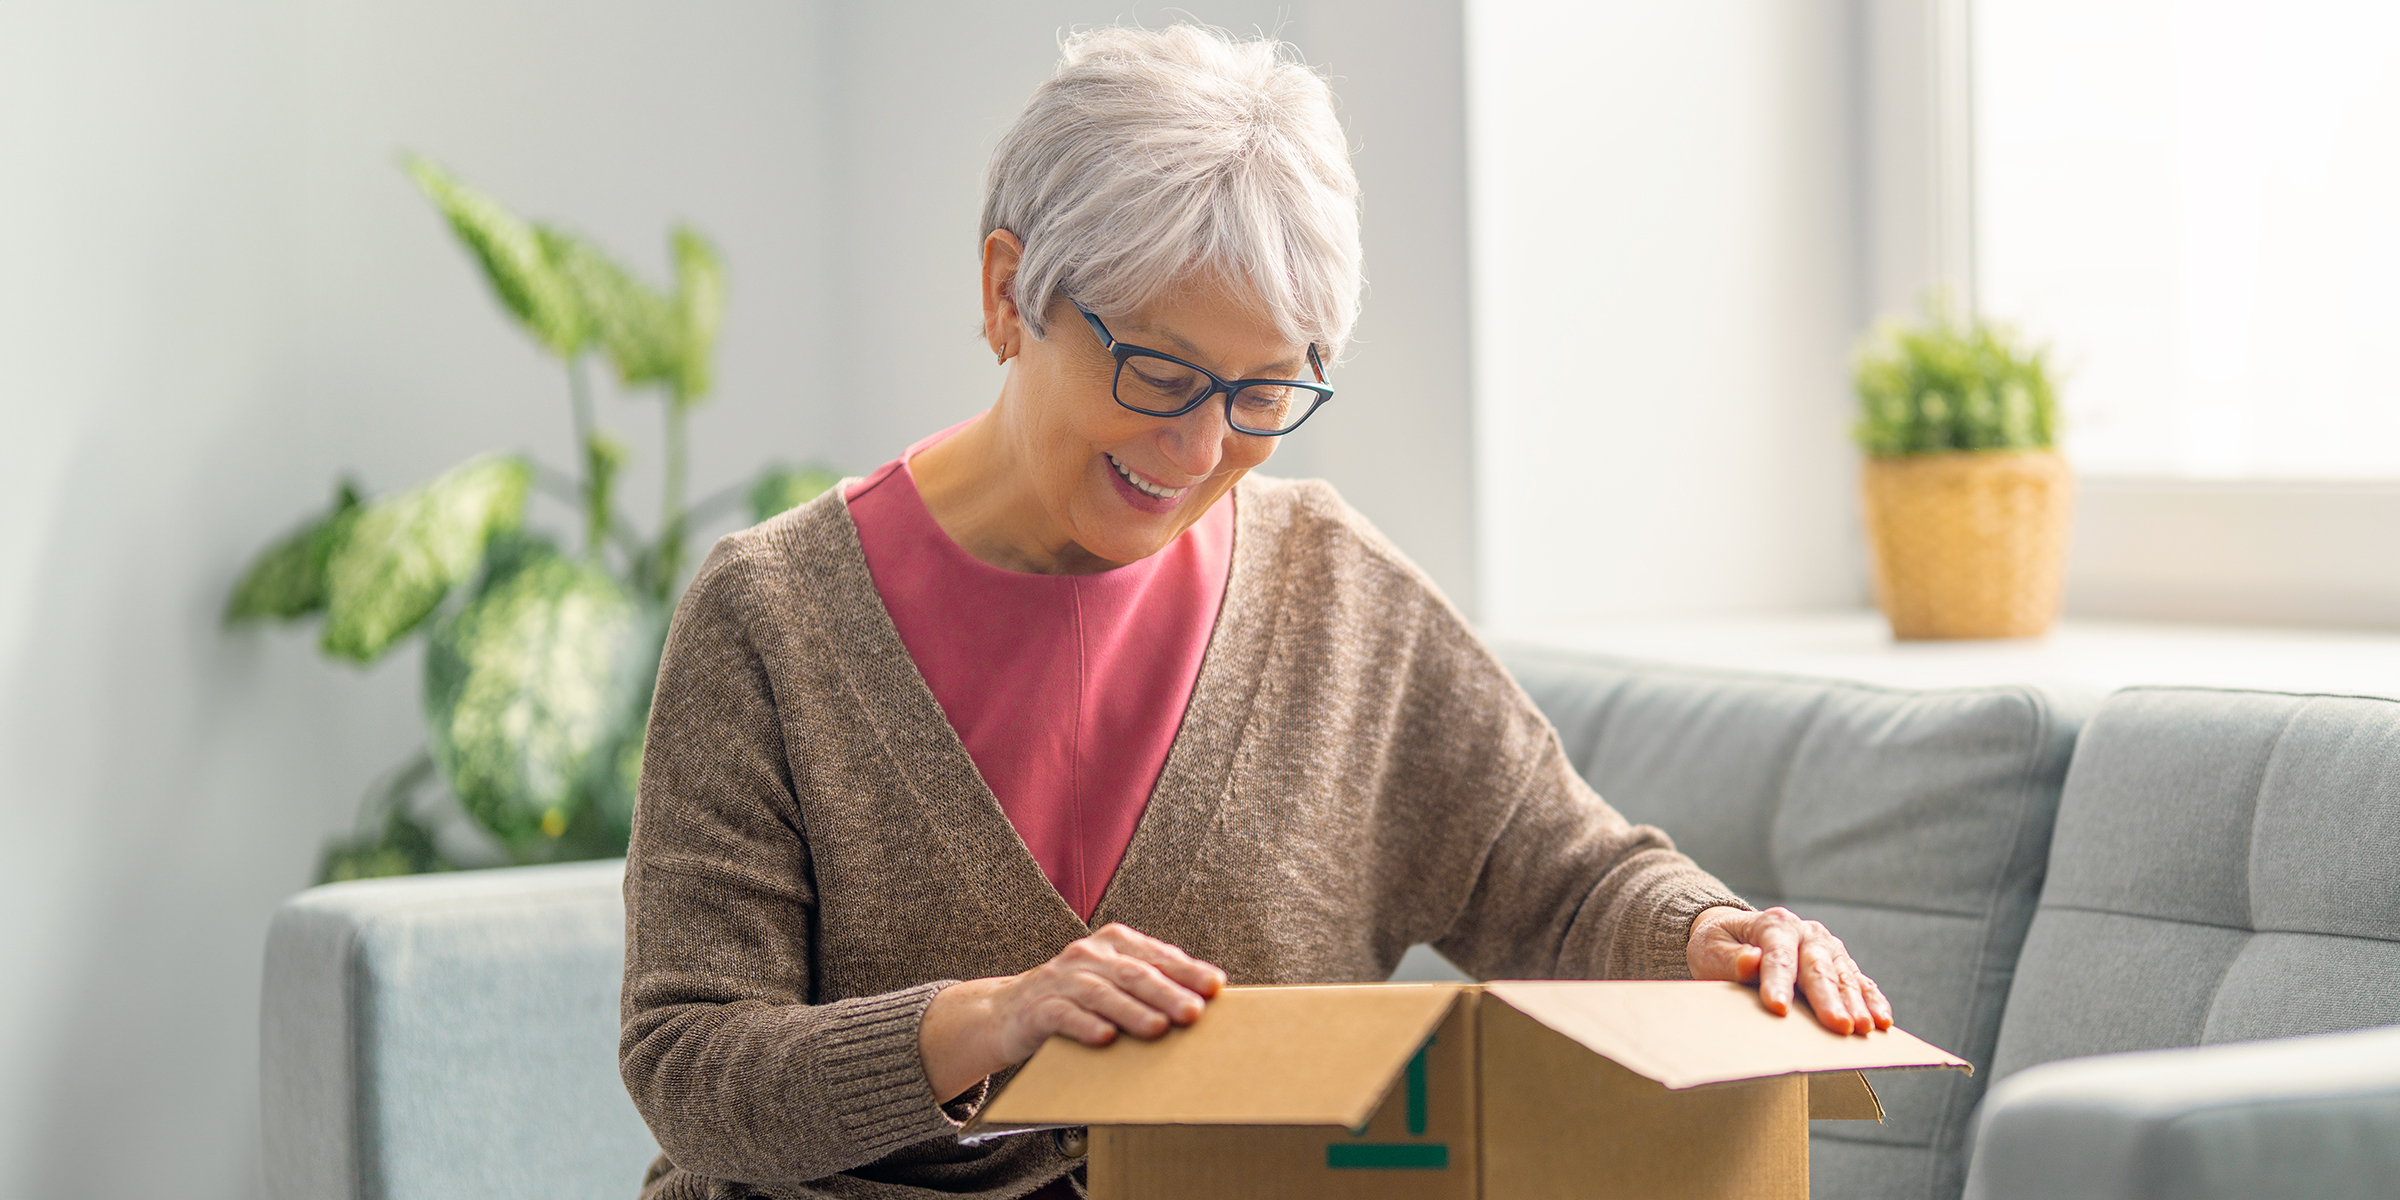 An old woman opening a box | Source: Shutterstock